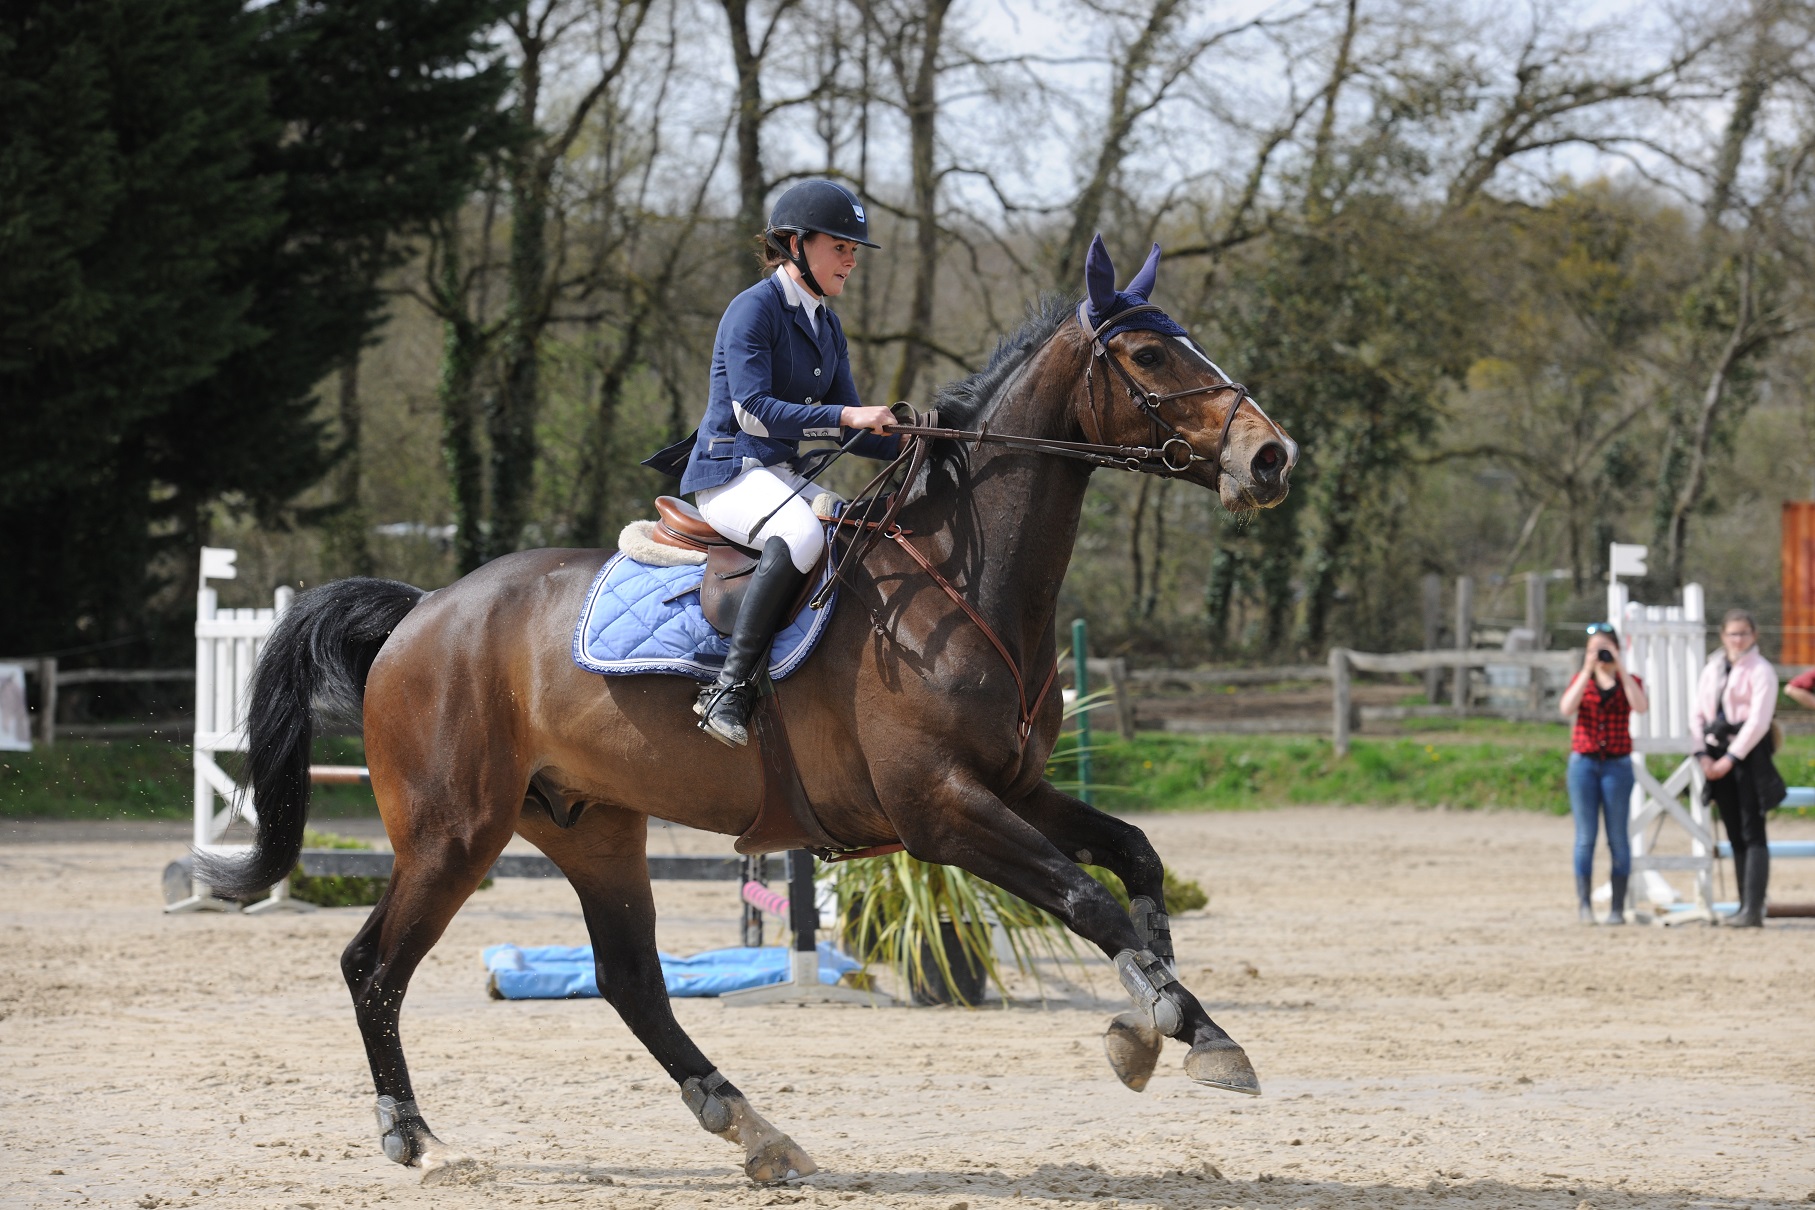 Adapting the amplitude of the horse’s stride for a succession of jumps